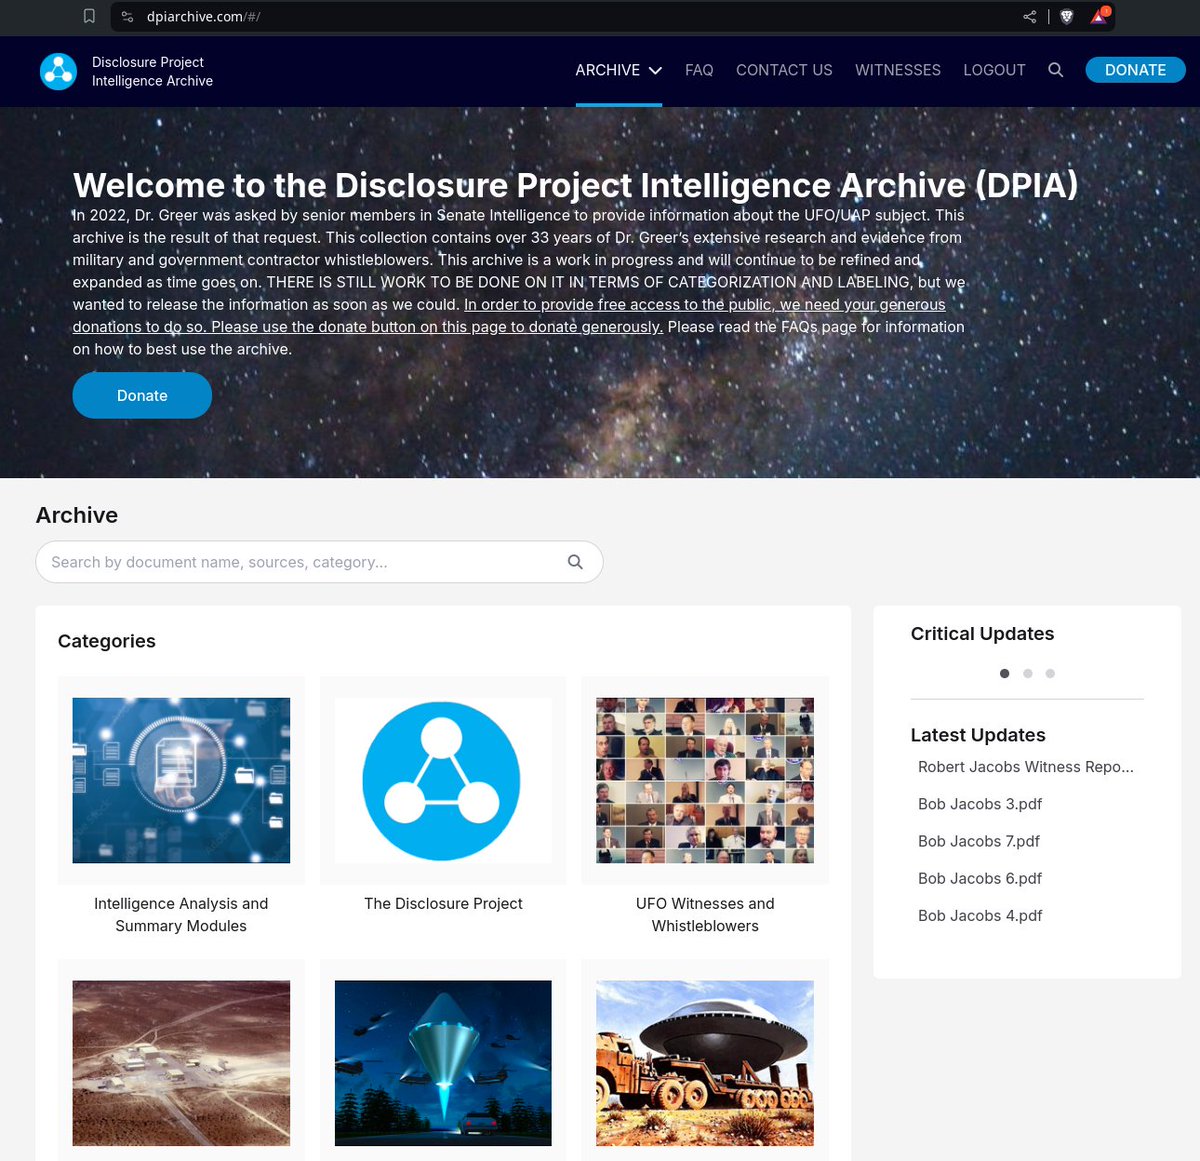 I Just registered for Steven Greer's  Disclosure Project Intelligence Archive (DPIA). It's free. This is a very big deal.
dpiarchive.com
#UAP